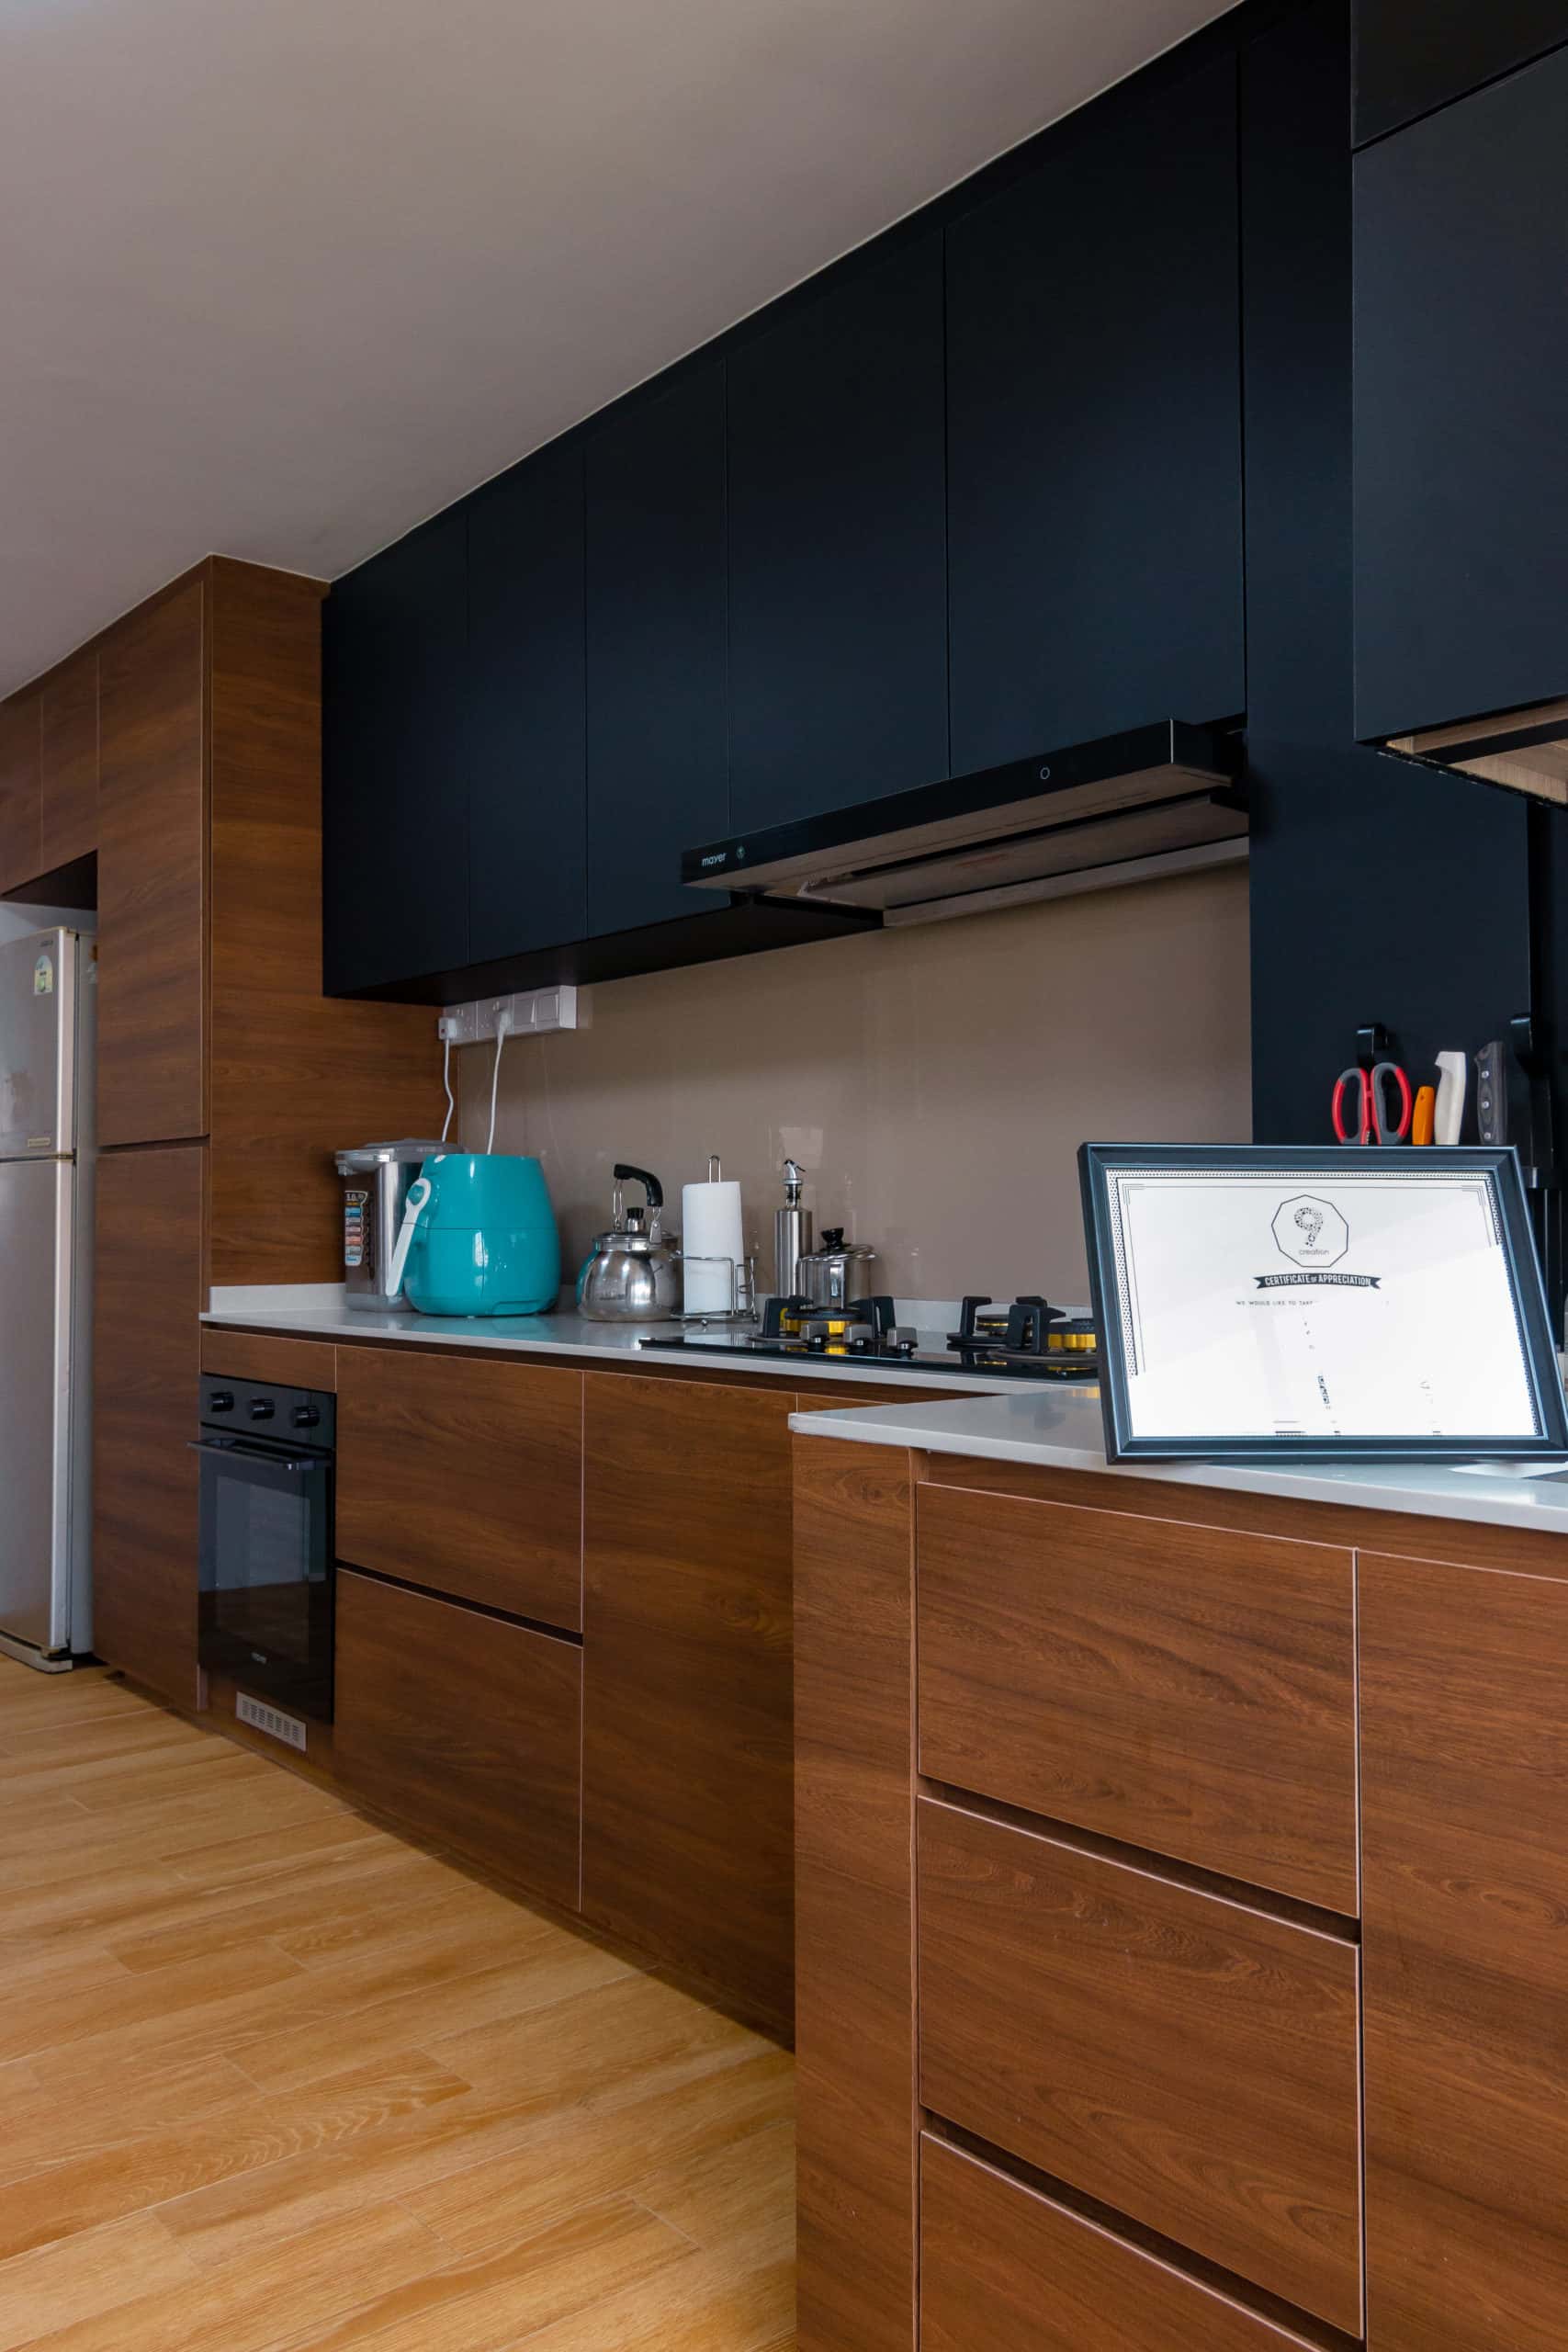 Read more about the article Kitchen Cabinet Design Idea For HDB Flat In Singapore